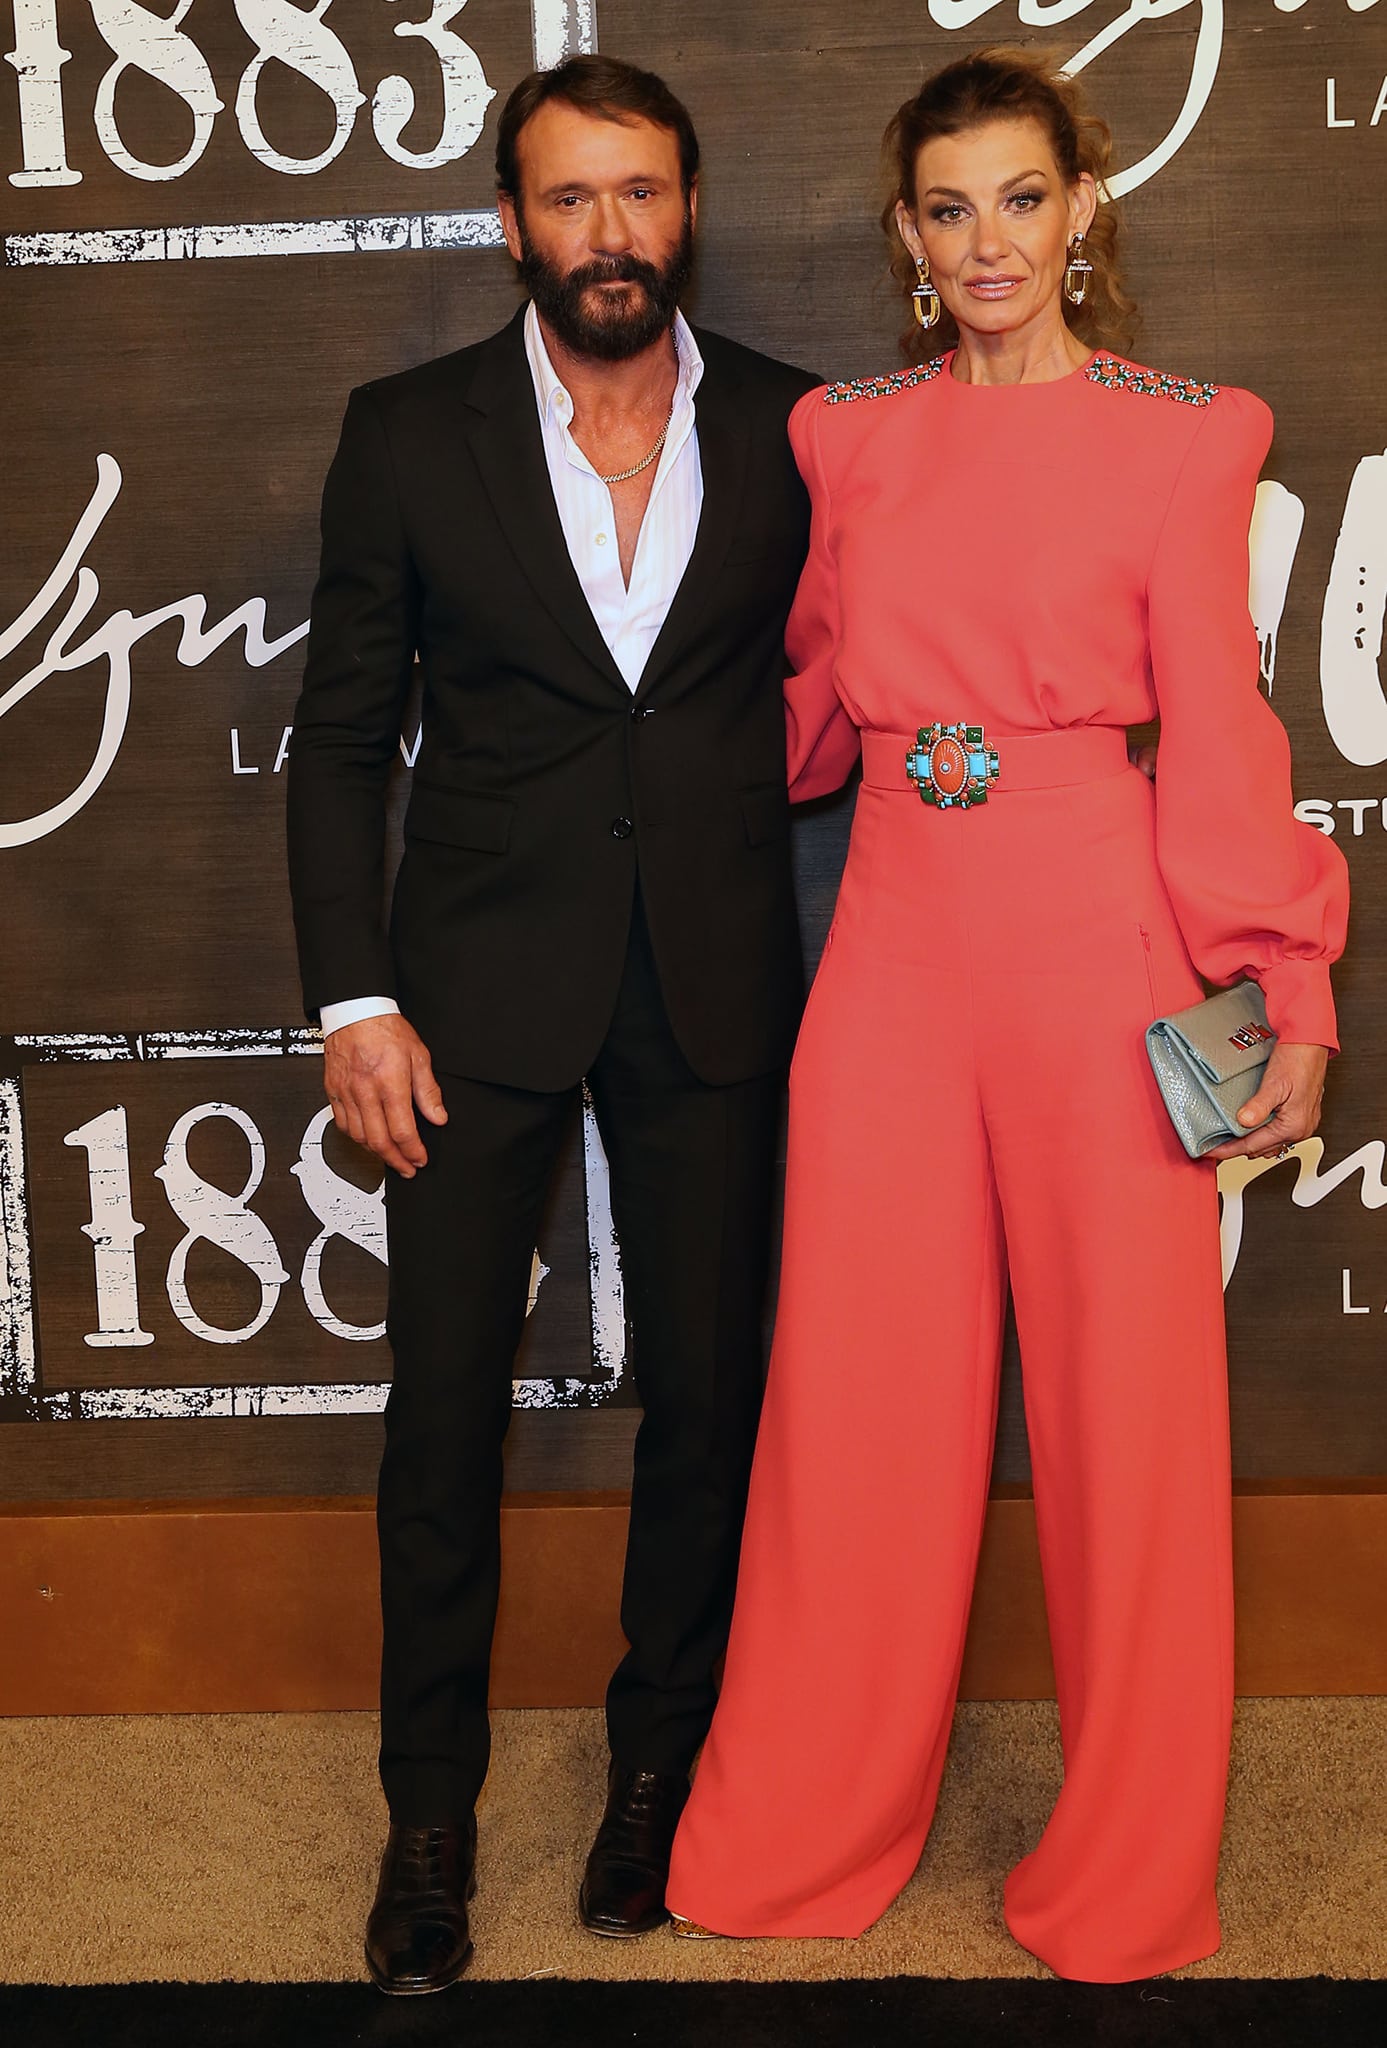 Husband and wife duo Tim McGraw and Faith Hill at the 1883 world premiere held at Wynn Las Vegas on December 12, 2021